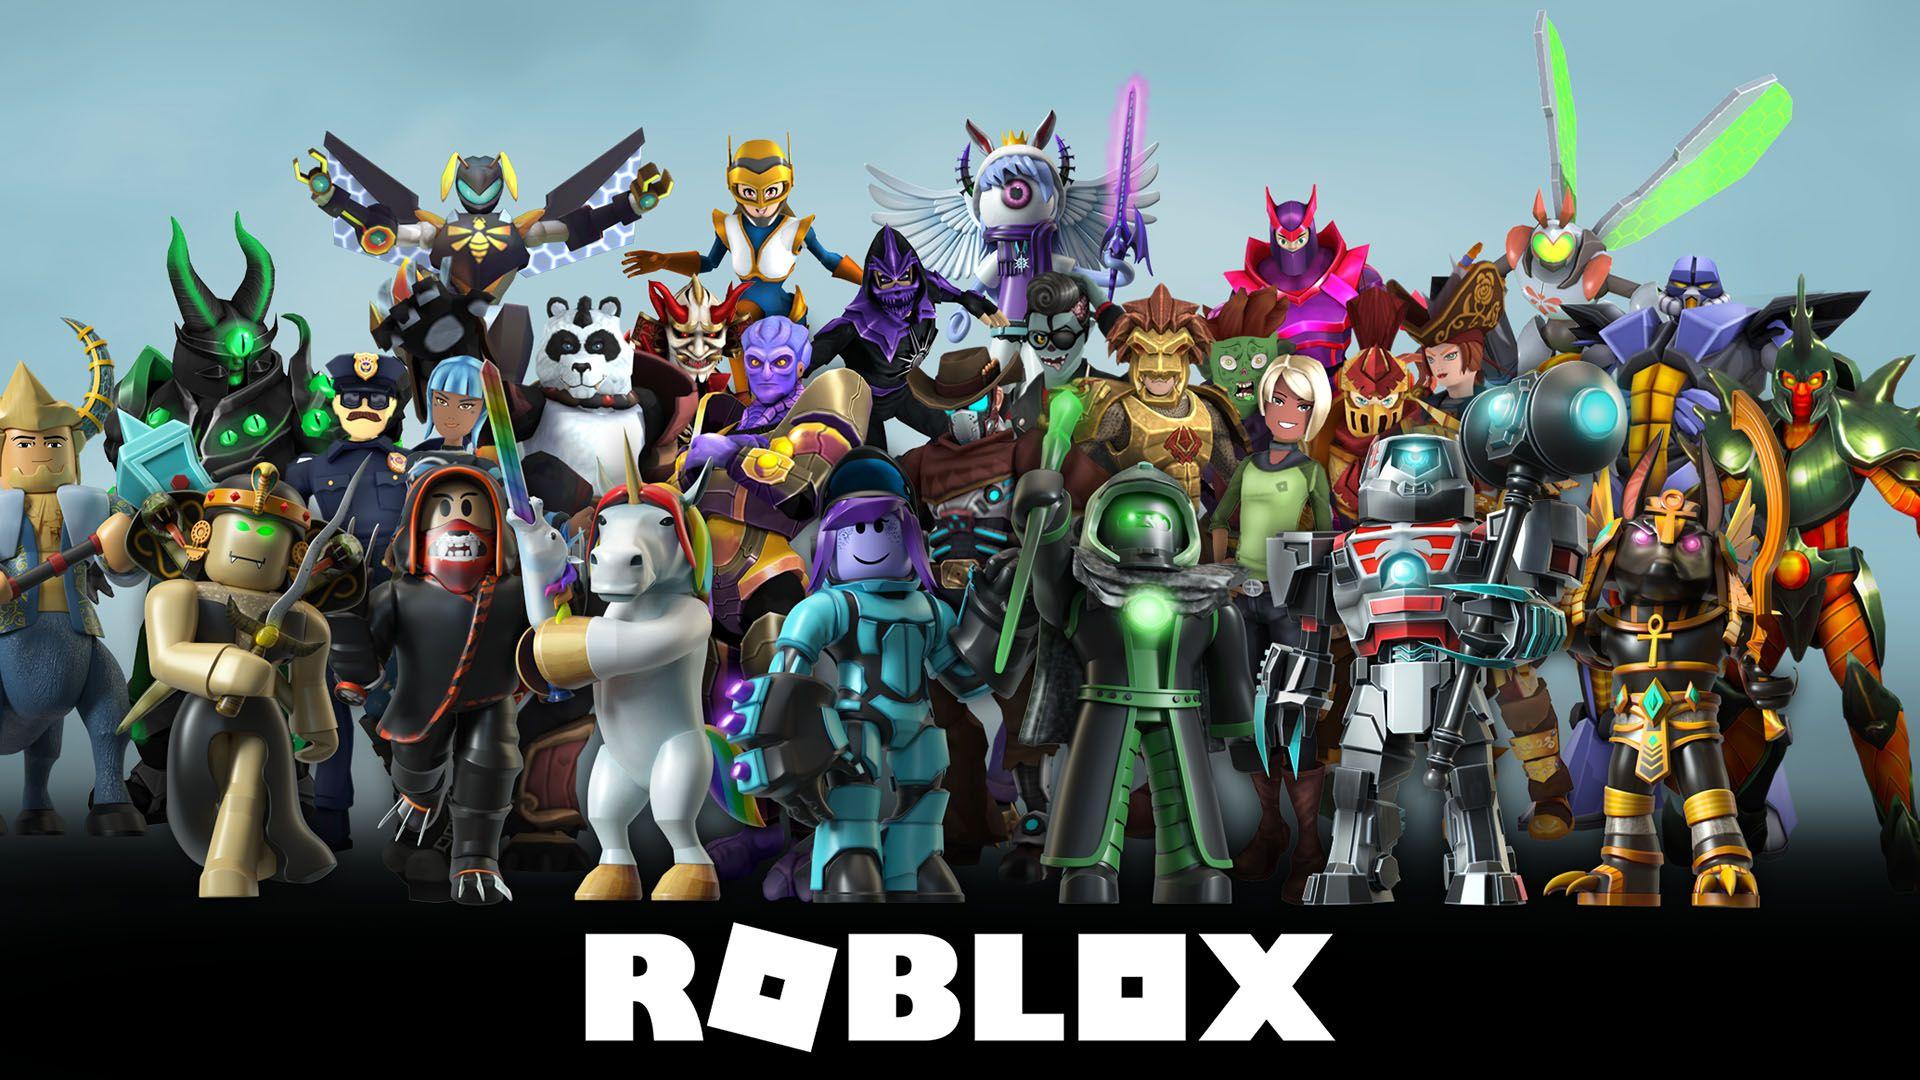 Gaming Roblox Wallpapers Wallpaper Cave - 2048 pixels wide and 1152 pixels tall roblox girl